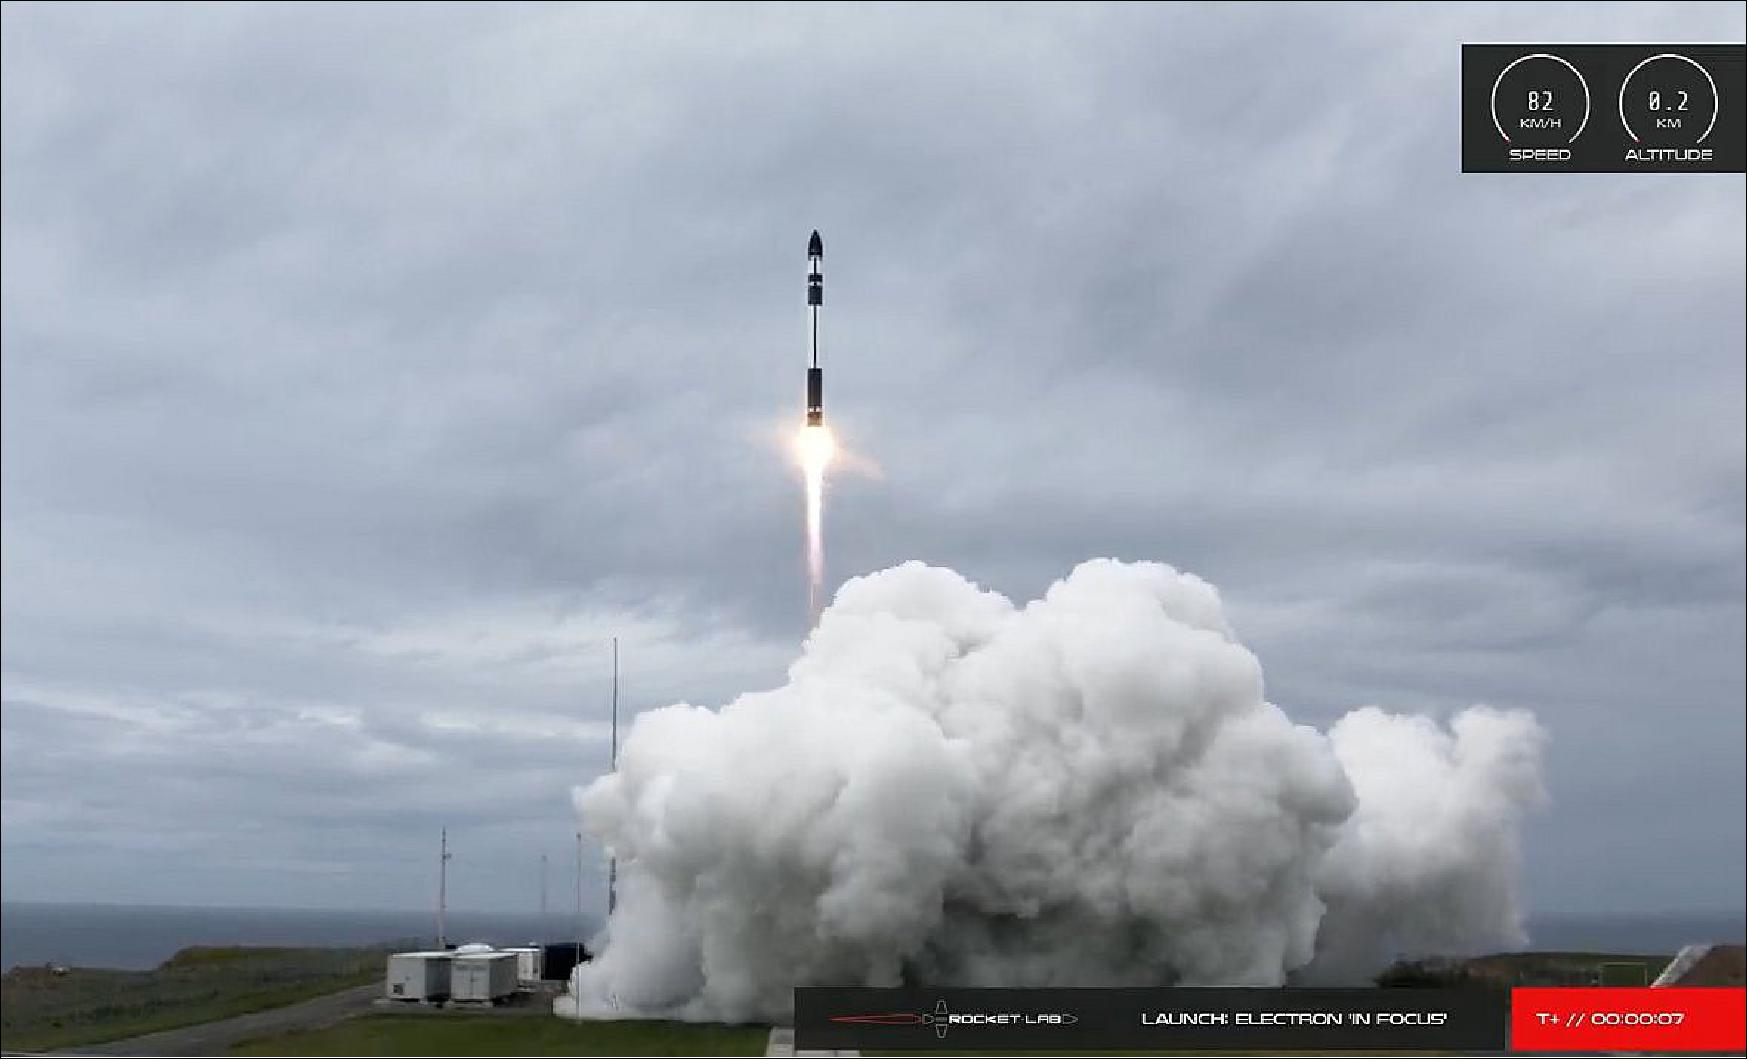 Figure 10: Liftoff of Rocket Lab’s Electron rocket carrying Planet's nine SuperDoves (3U CubeSats) and an experimental microsatellite of Canon Electronics (image credit: Rocket Lab)